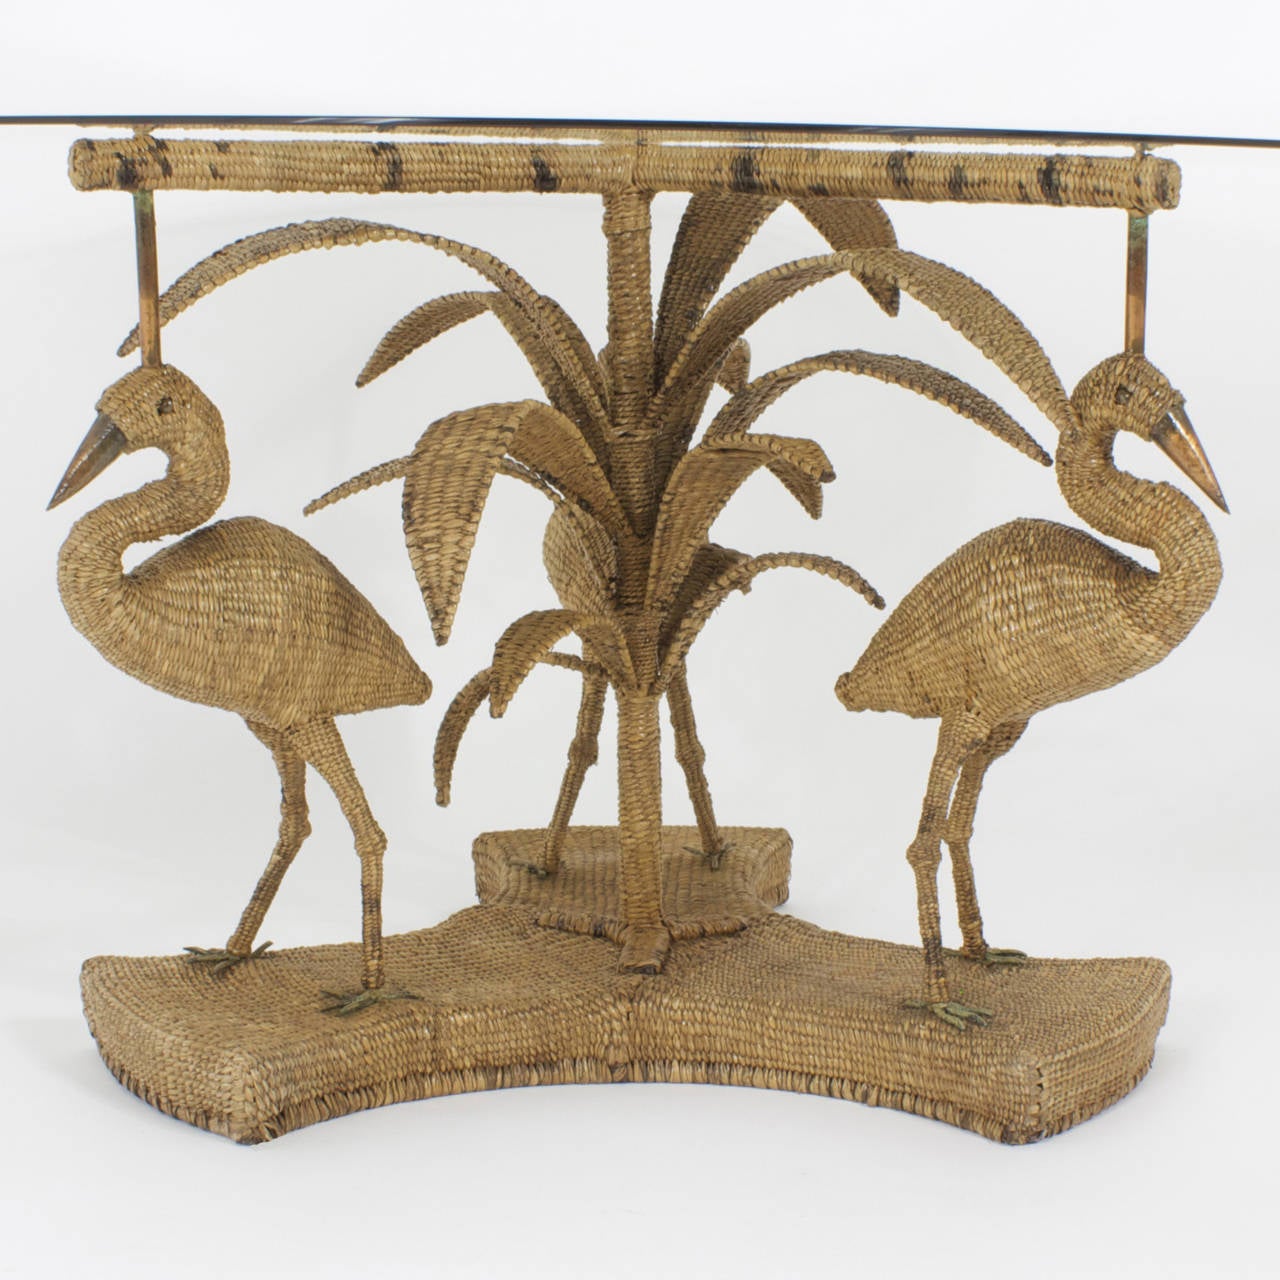 Whimsical, wicker or reed glass top dining table featuring a palm tree pedestal and large birds, possibly egrets or herons, with brass eyes, beaks and feet. The expertly woven rattan or reed, is tightly wound around a metal form. Folk Art, with